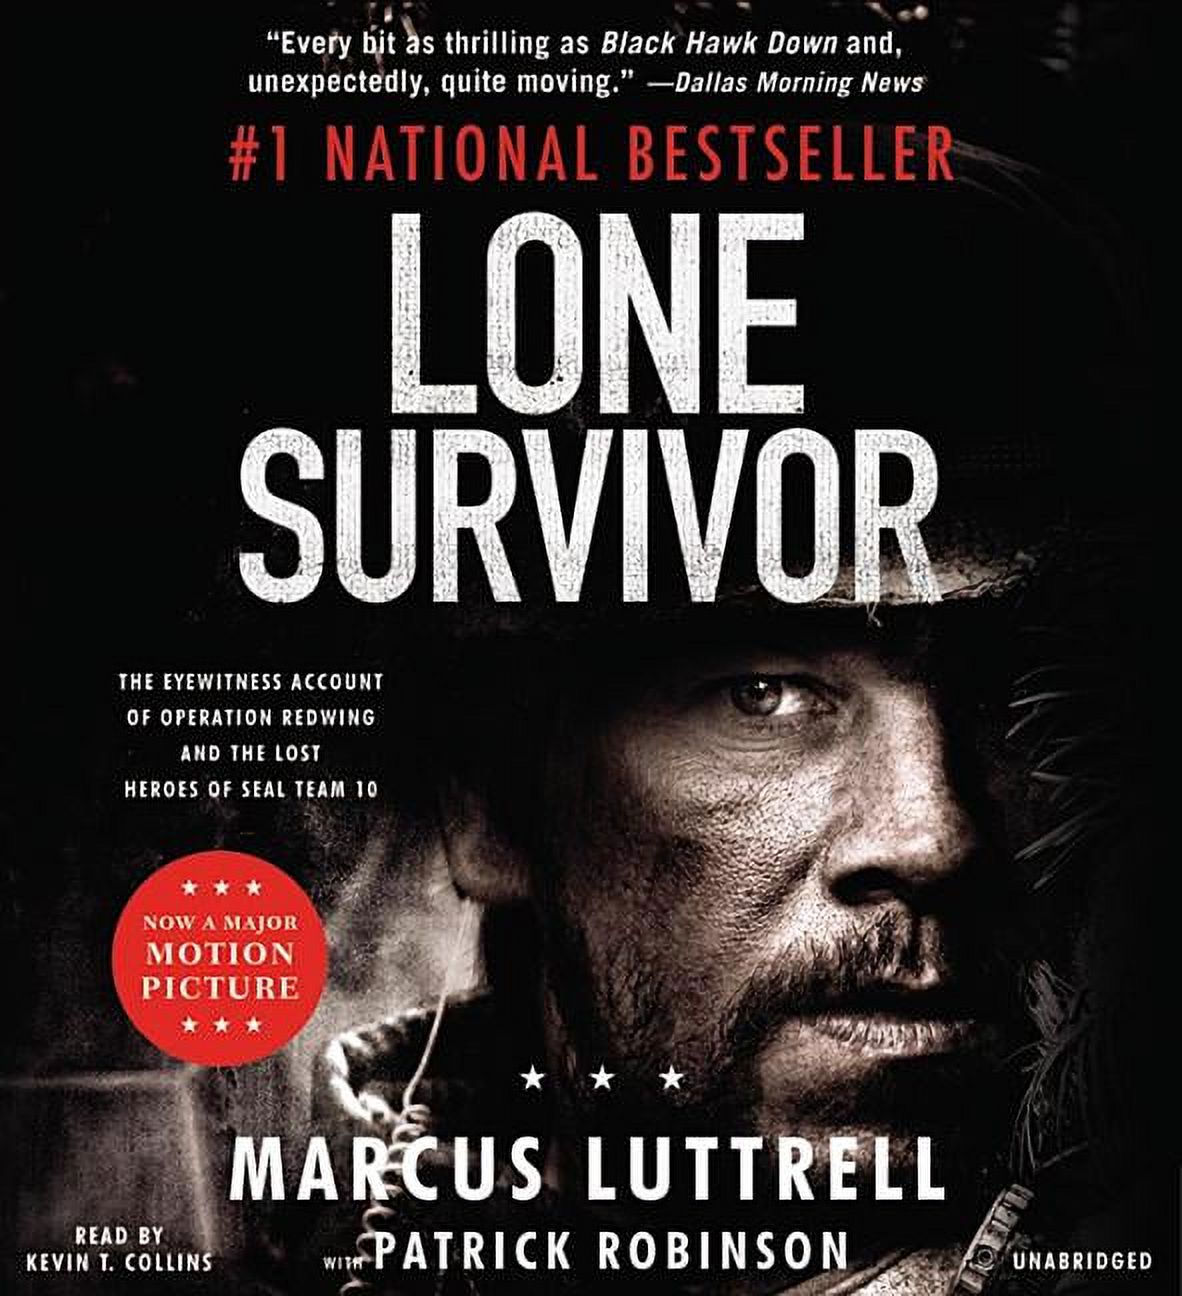 Lone Survivor : The Eyewitness Account of Operation Redwing and the Lost Heroes of SEAL Team 10 (CD-Audio) - image 1 of 1